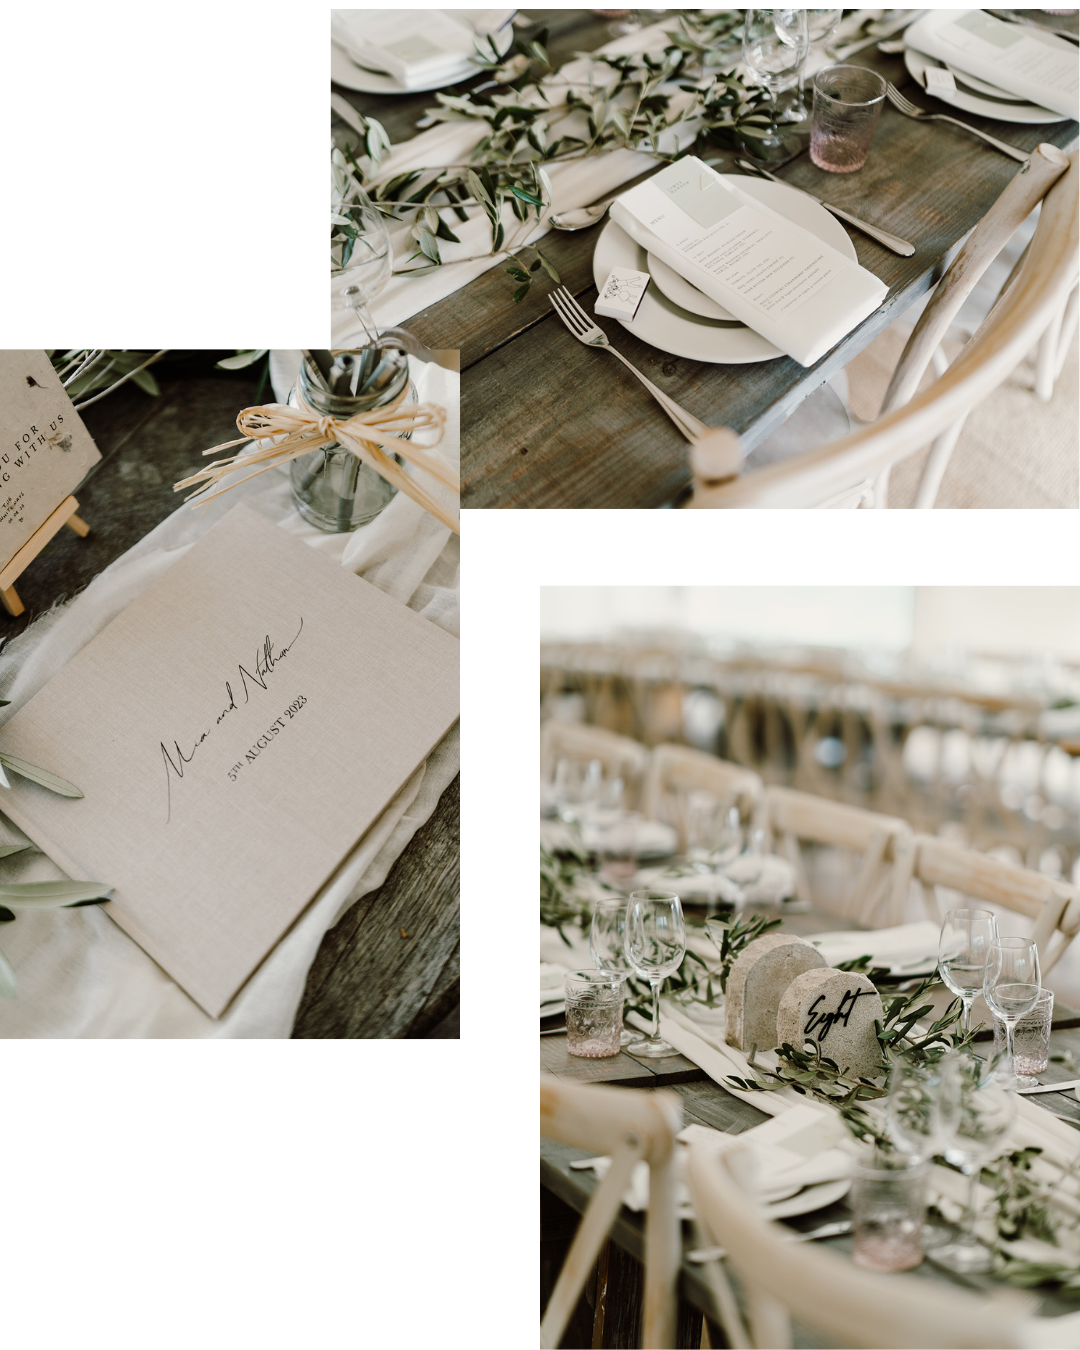 Italian rustic classic tablescape for a modern relaxed wedding